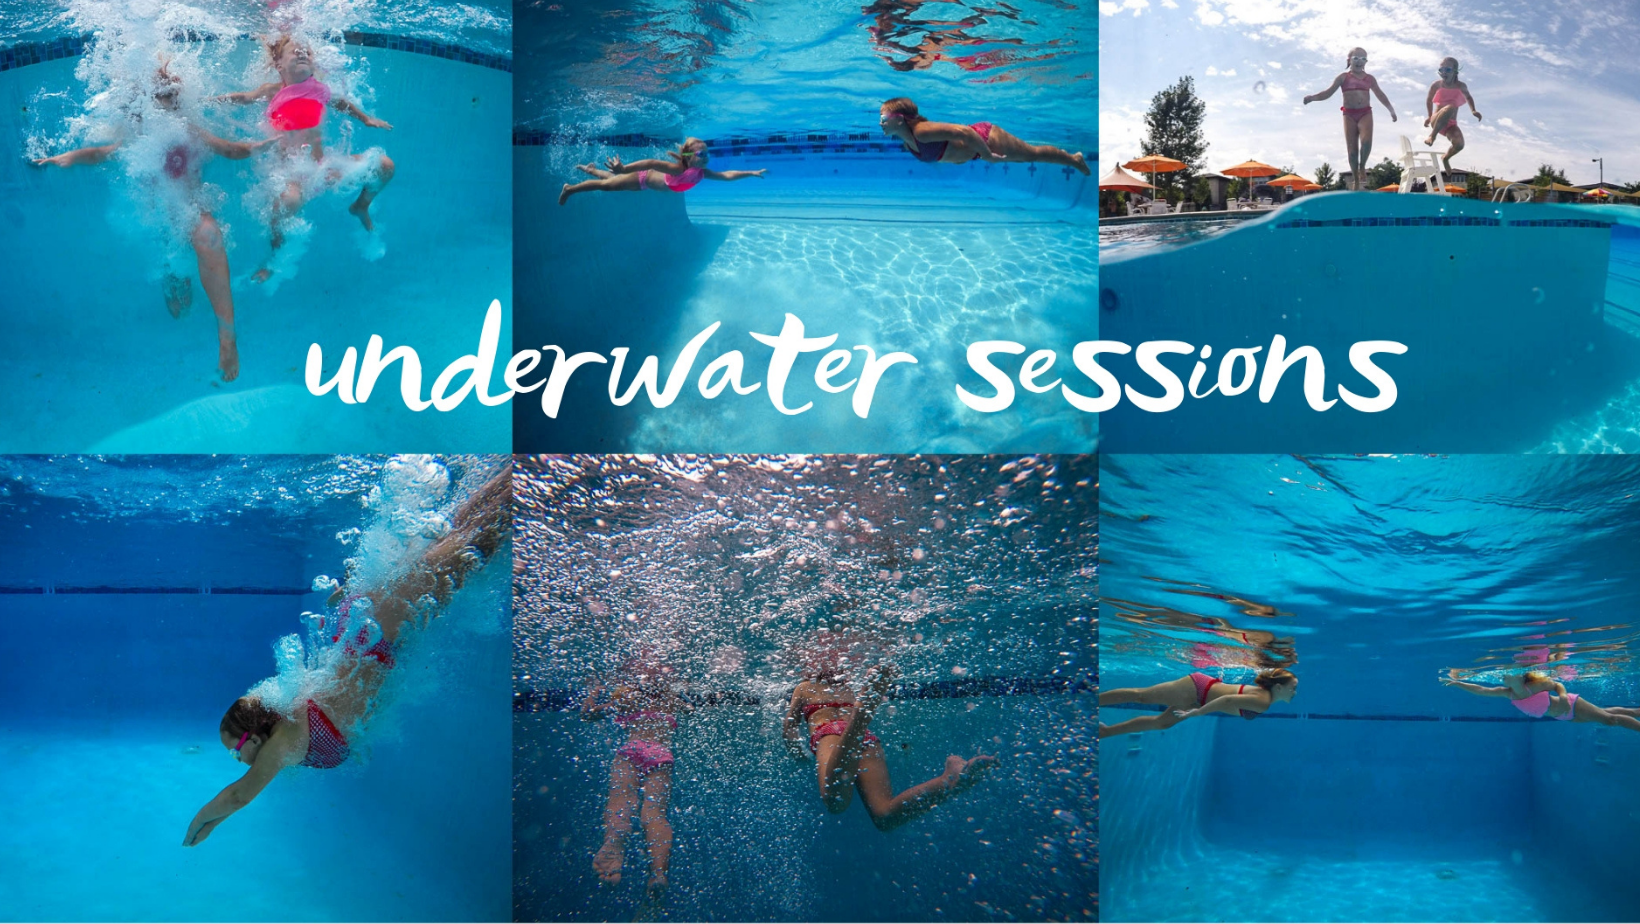 Underwater sessions